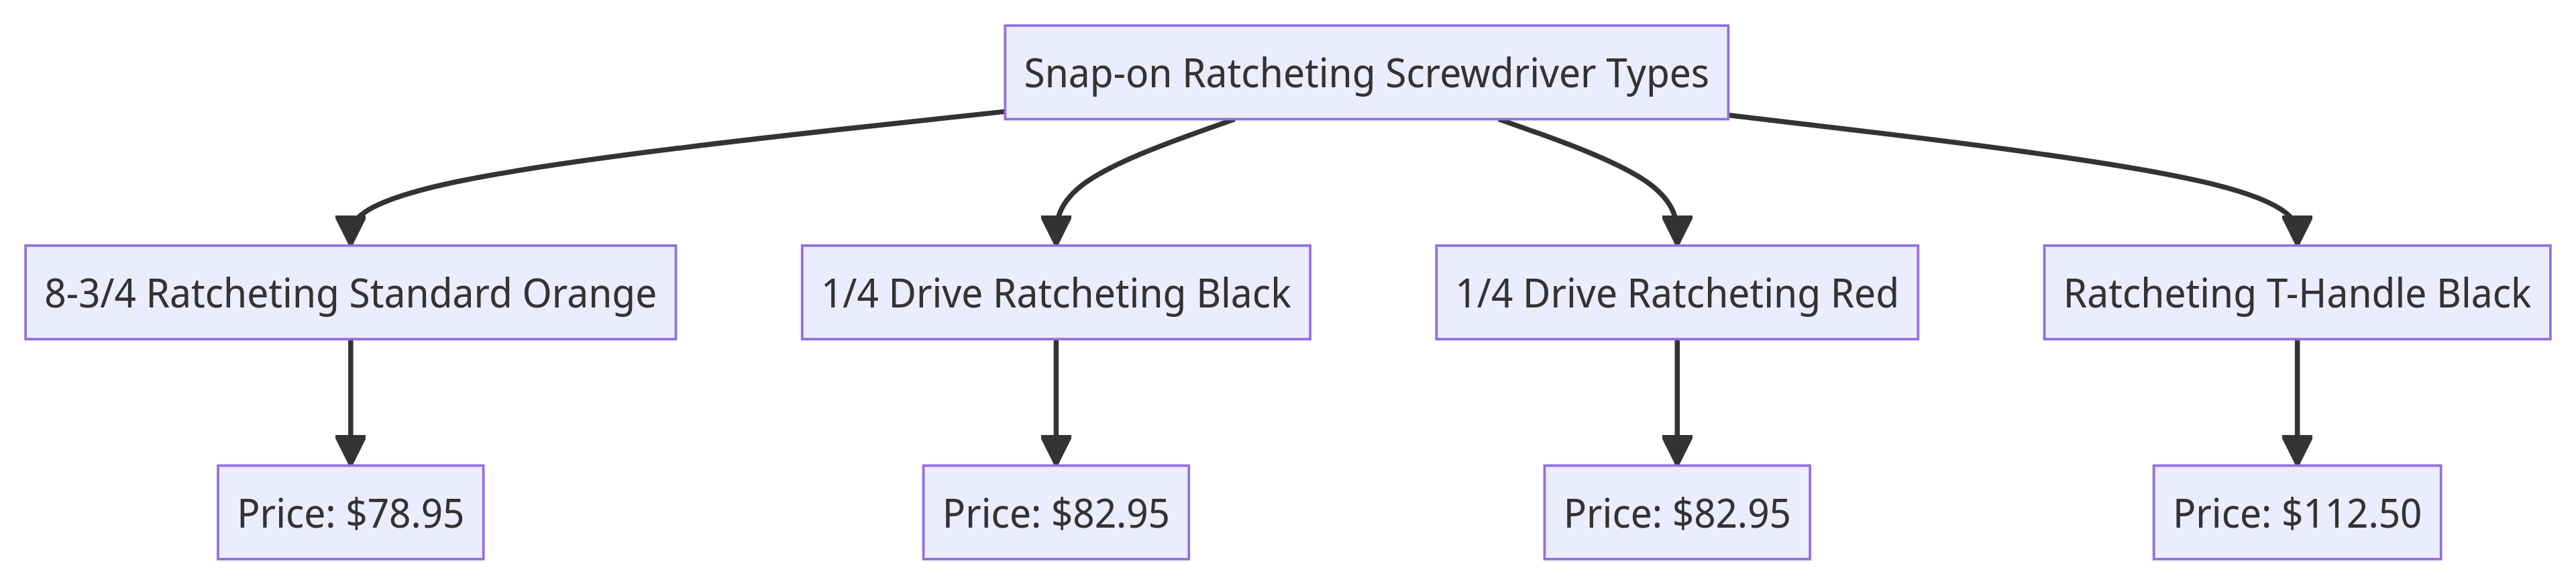 Flow Chart of Snap-on Ratcheting Screwdriver Types and Prices